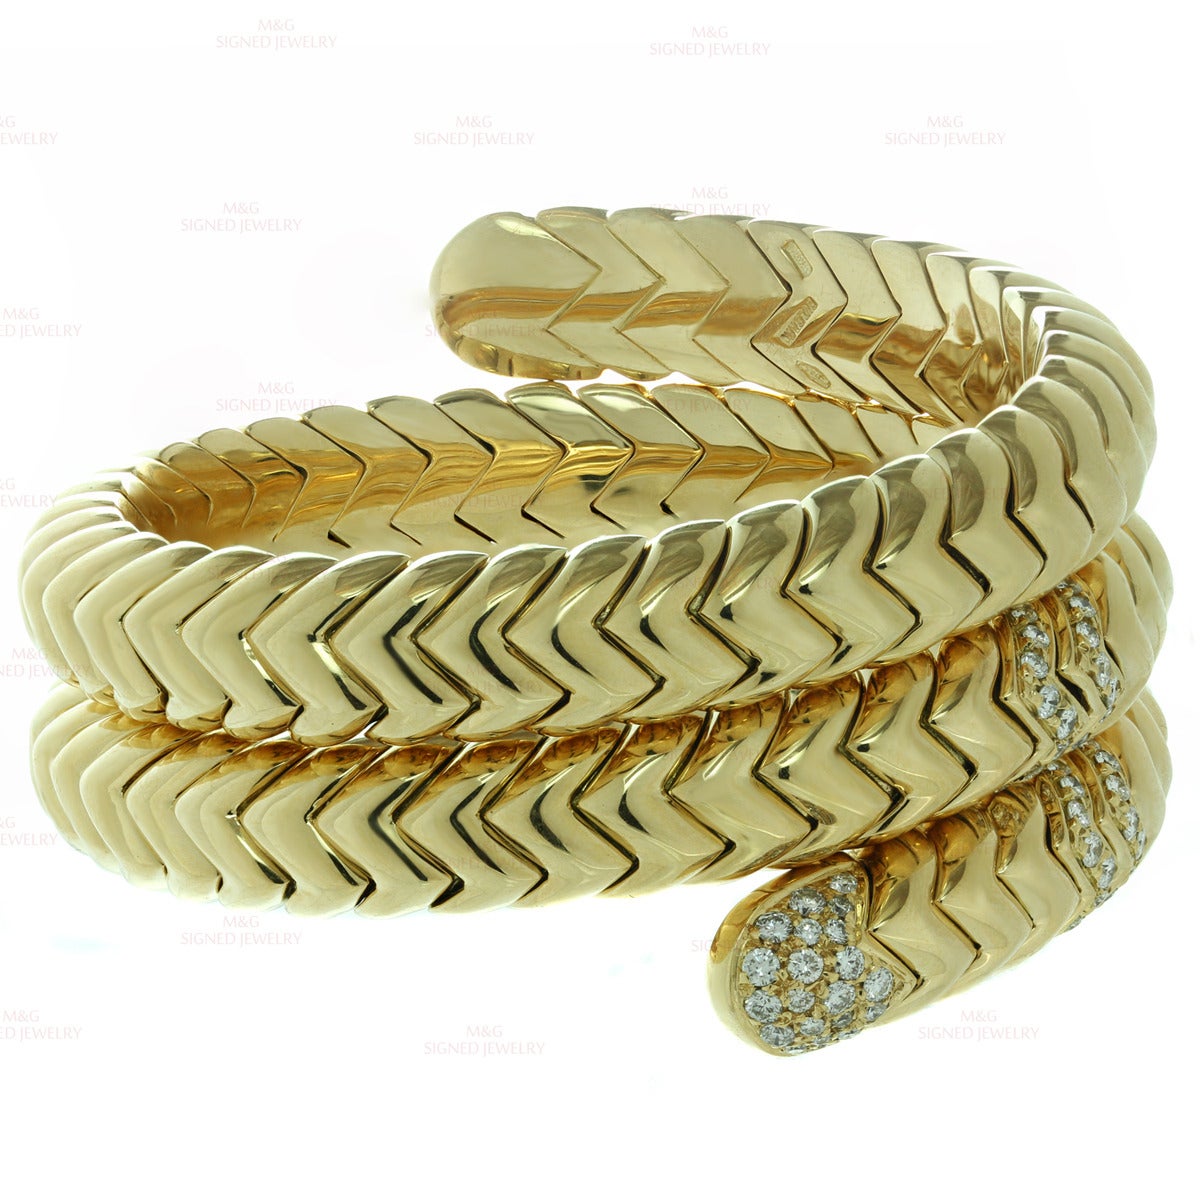 This stunning bracelet from Bulgari's Spiga collection features a flexible 3-row geometric design made in 18k yellow gold and set with brilliant-cut round E-F VVS1-VVS2 diamonds of an estimated 3 carats. Made in Italy circa 1990s. Measurements: